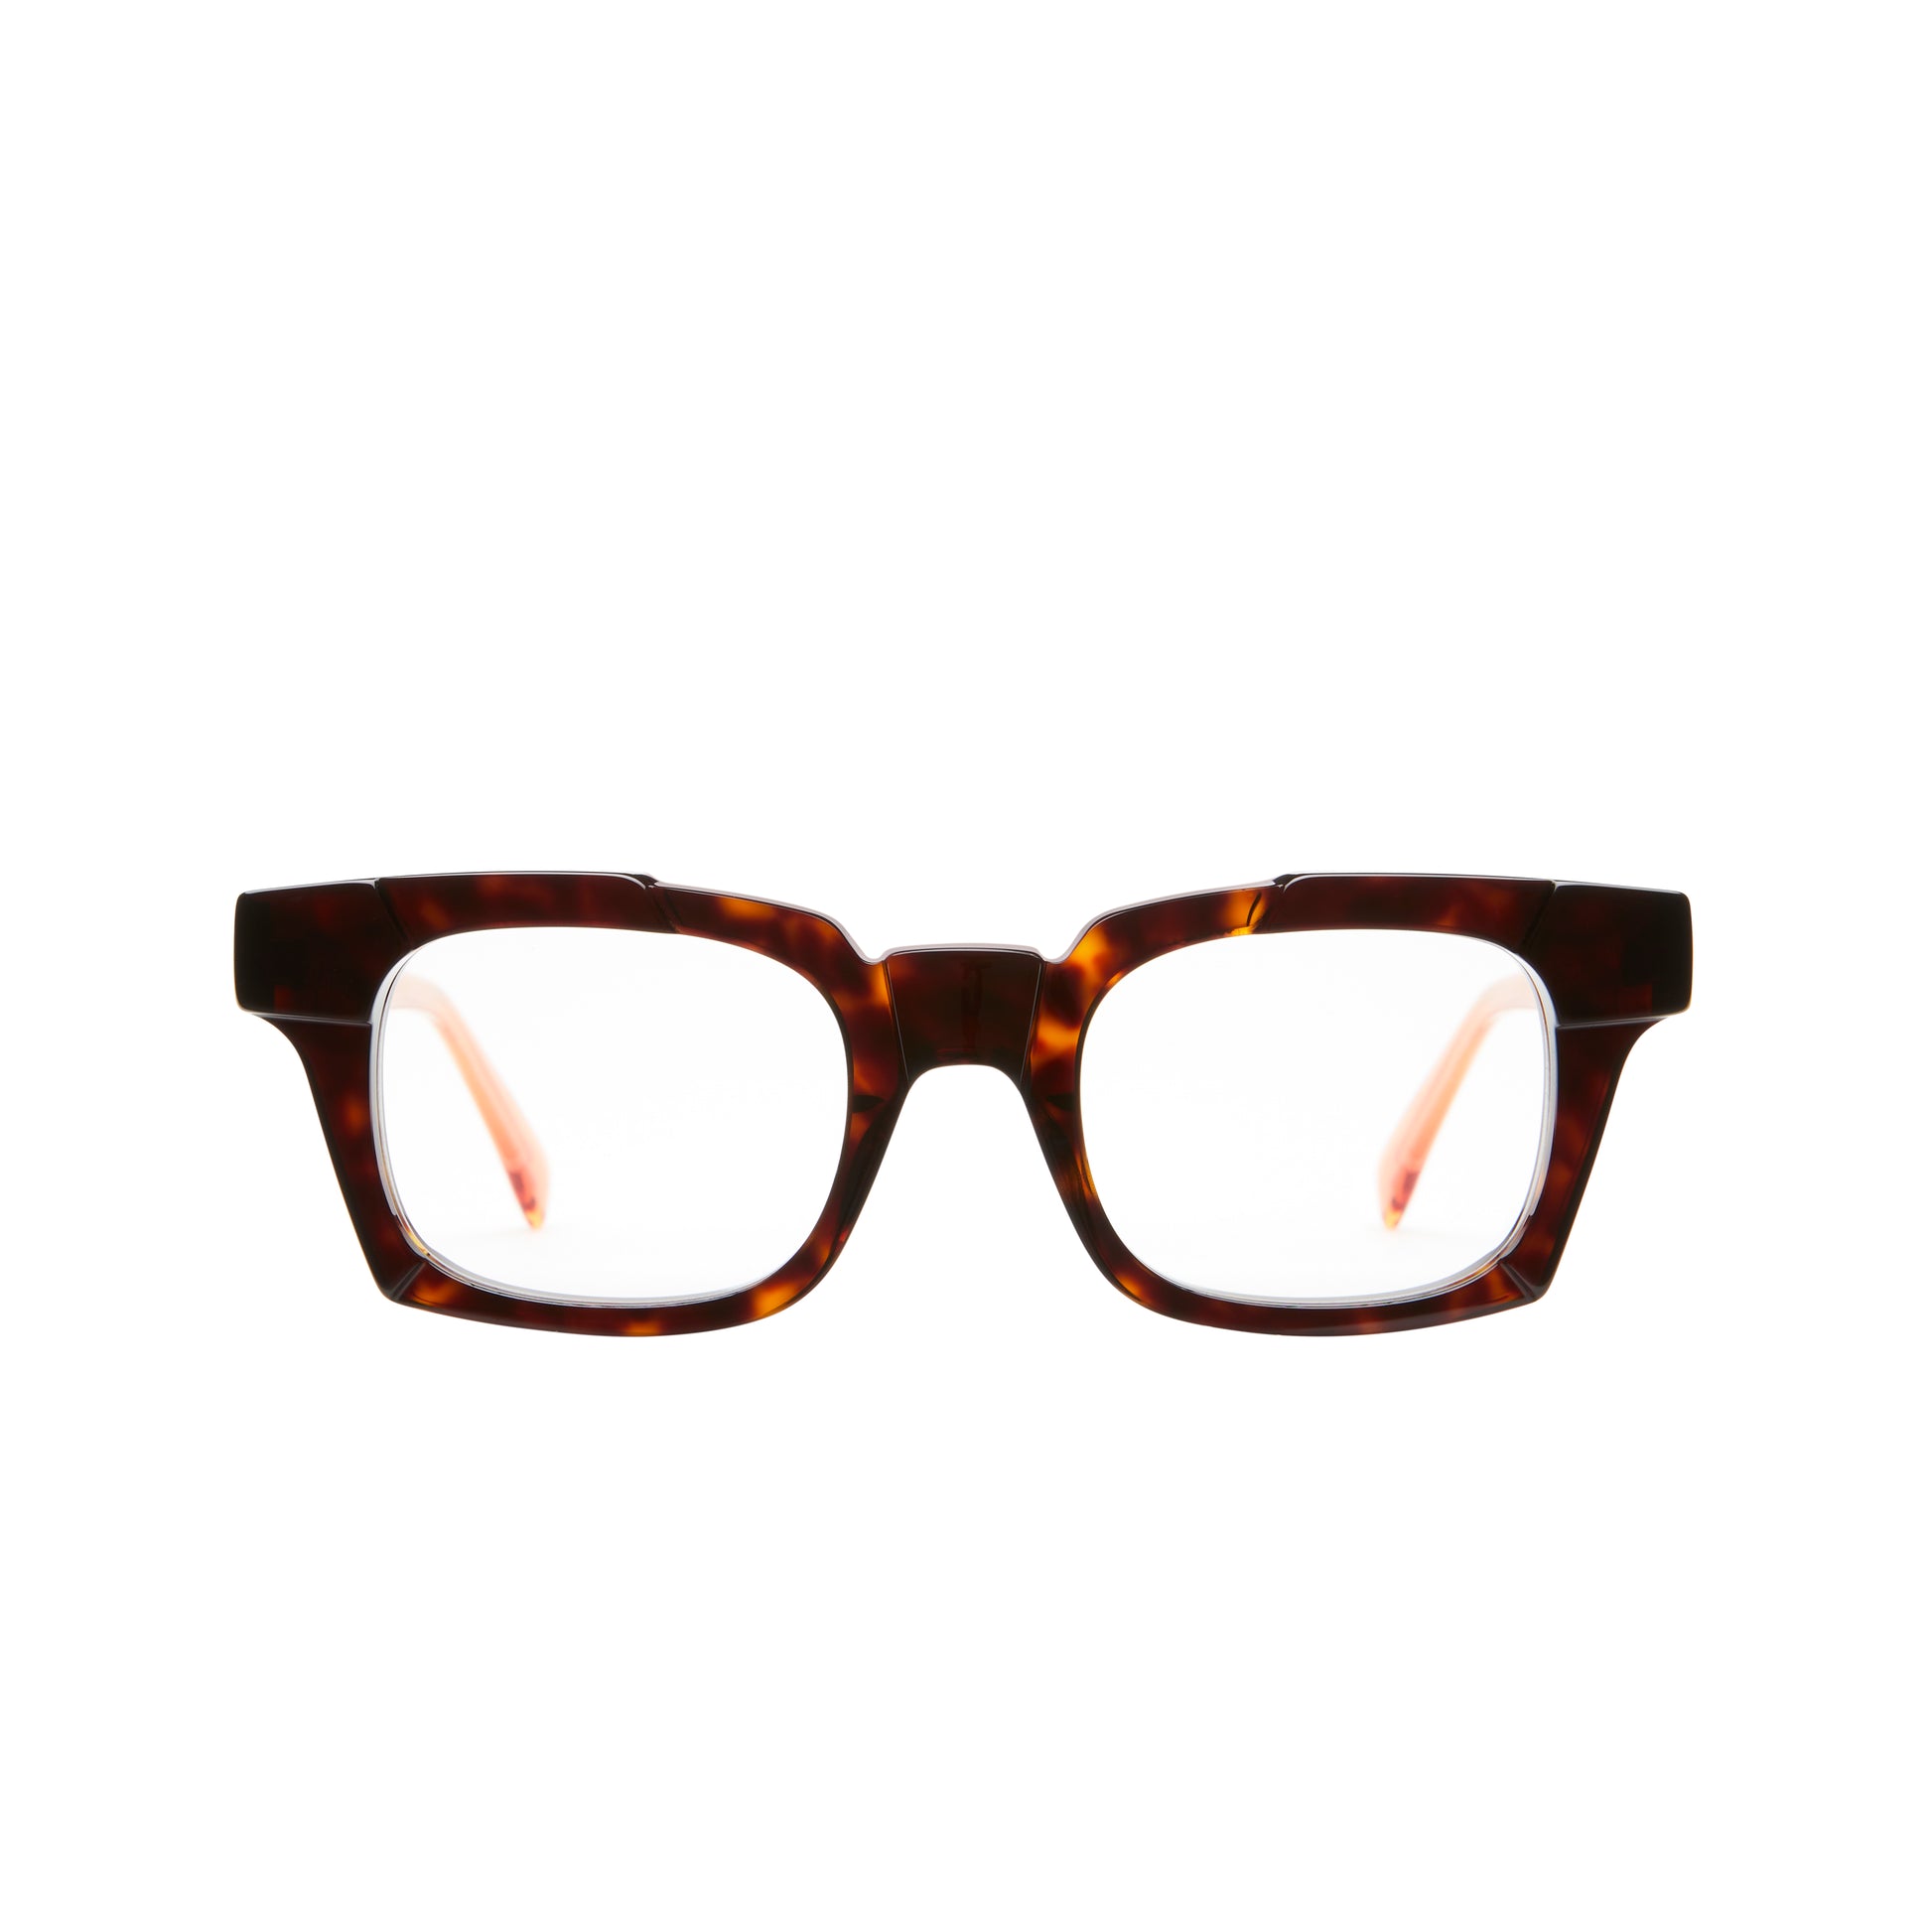 <p> Kuboraum MASKE S3 is a  Tortoise, Transparent coral; Acetate Optical Frame with a Avant Garde shape.  </p><p>Shop with confidence from Adair Eyewear, a Kuboraum Authorized Dealer.  We have provided the best in customer service and great designer eyewear for over 40 years. Visit https://adaireyewearonline.com</p>